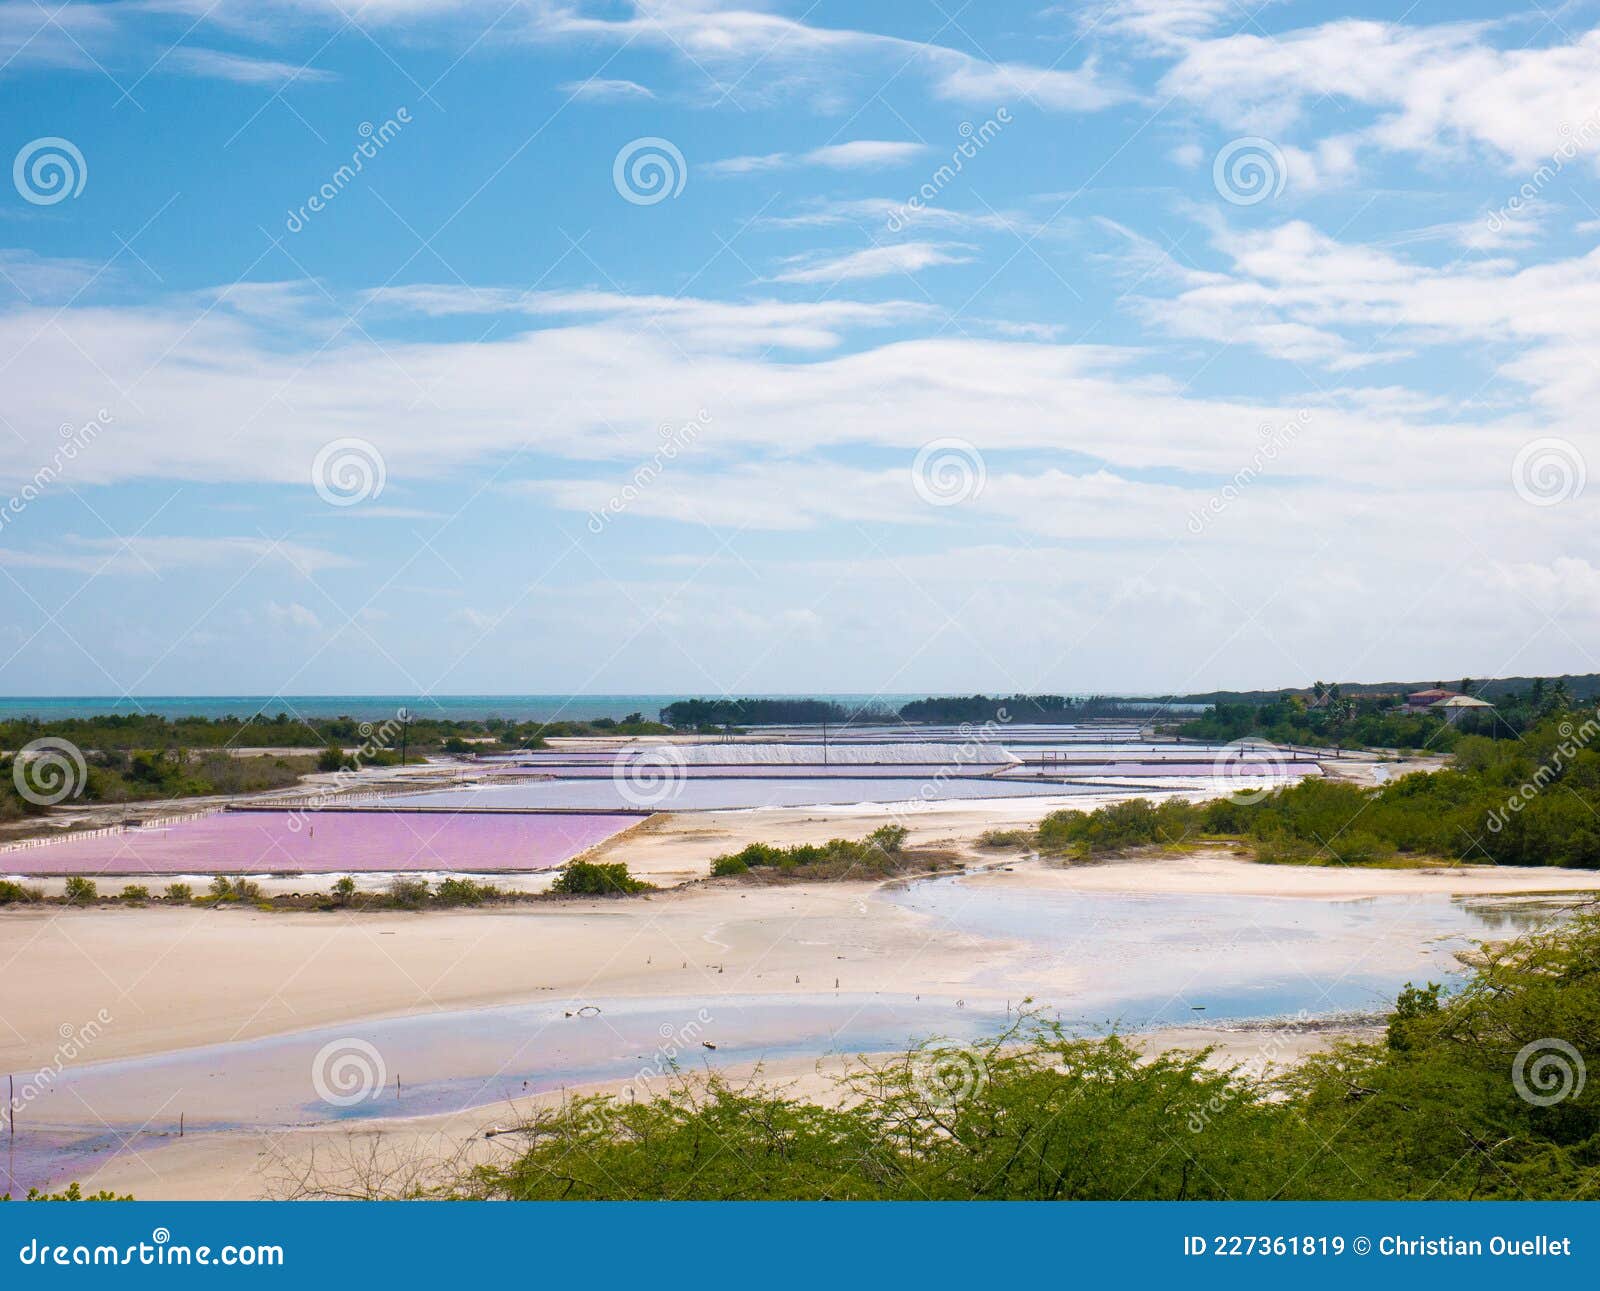 in puerto rico`s southwest corner, cabo rojo, tons of salt are extracted from seawater annually